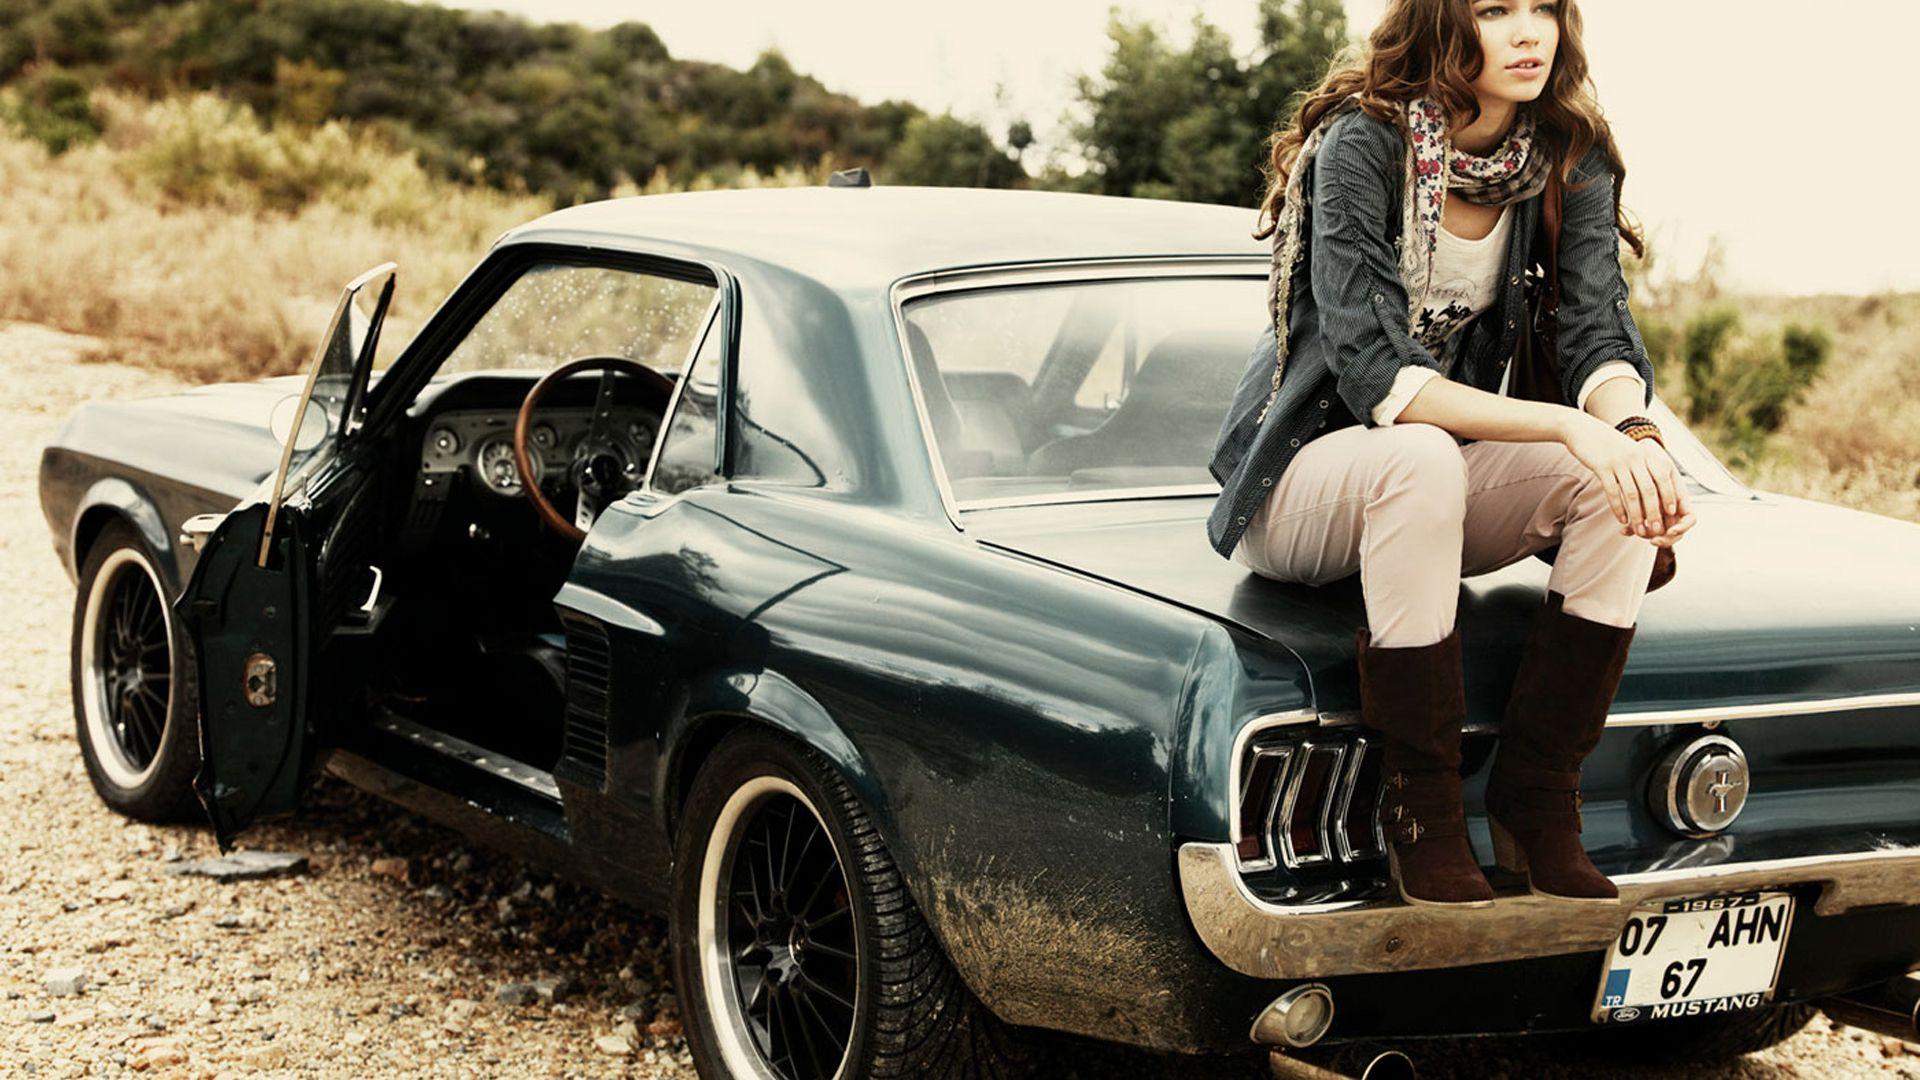 Girl Sitting on Ford Mustang 1967 widescreen wallpaper. Wide